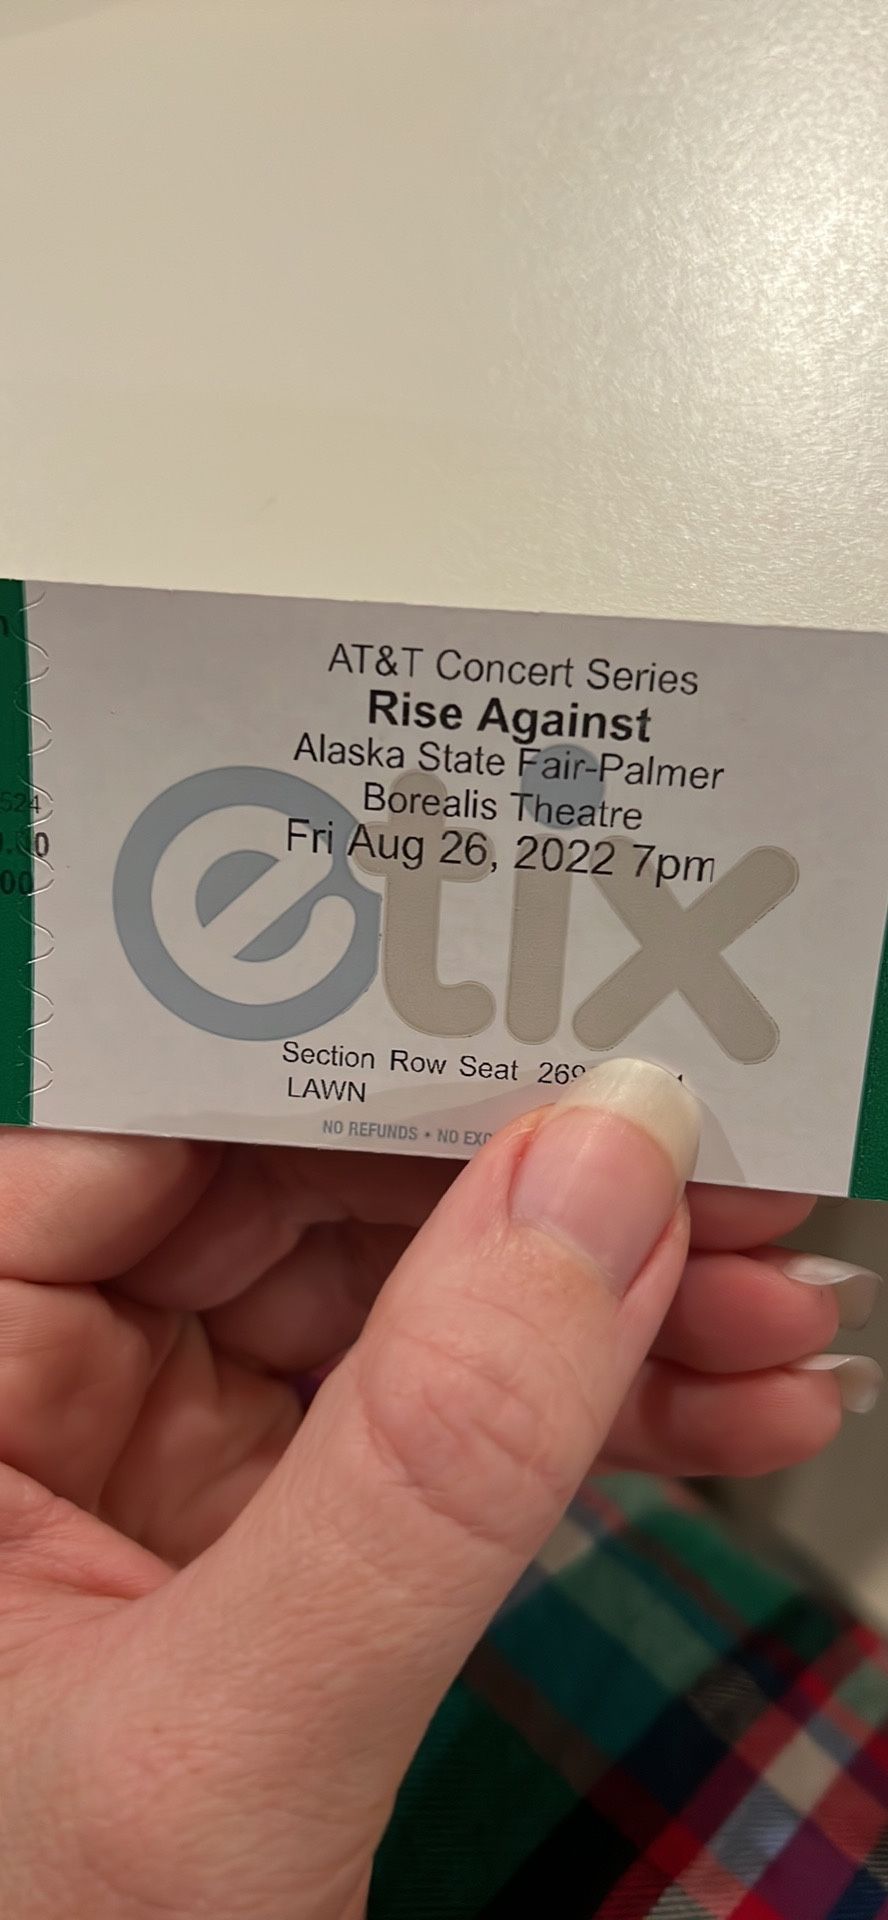 Rise Against Tickets